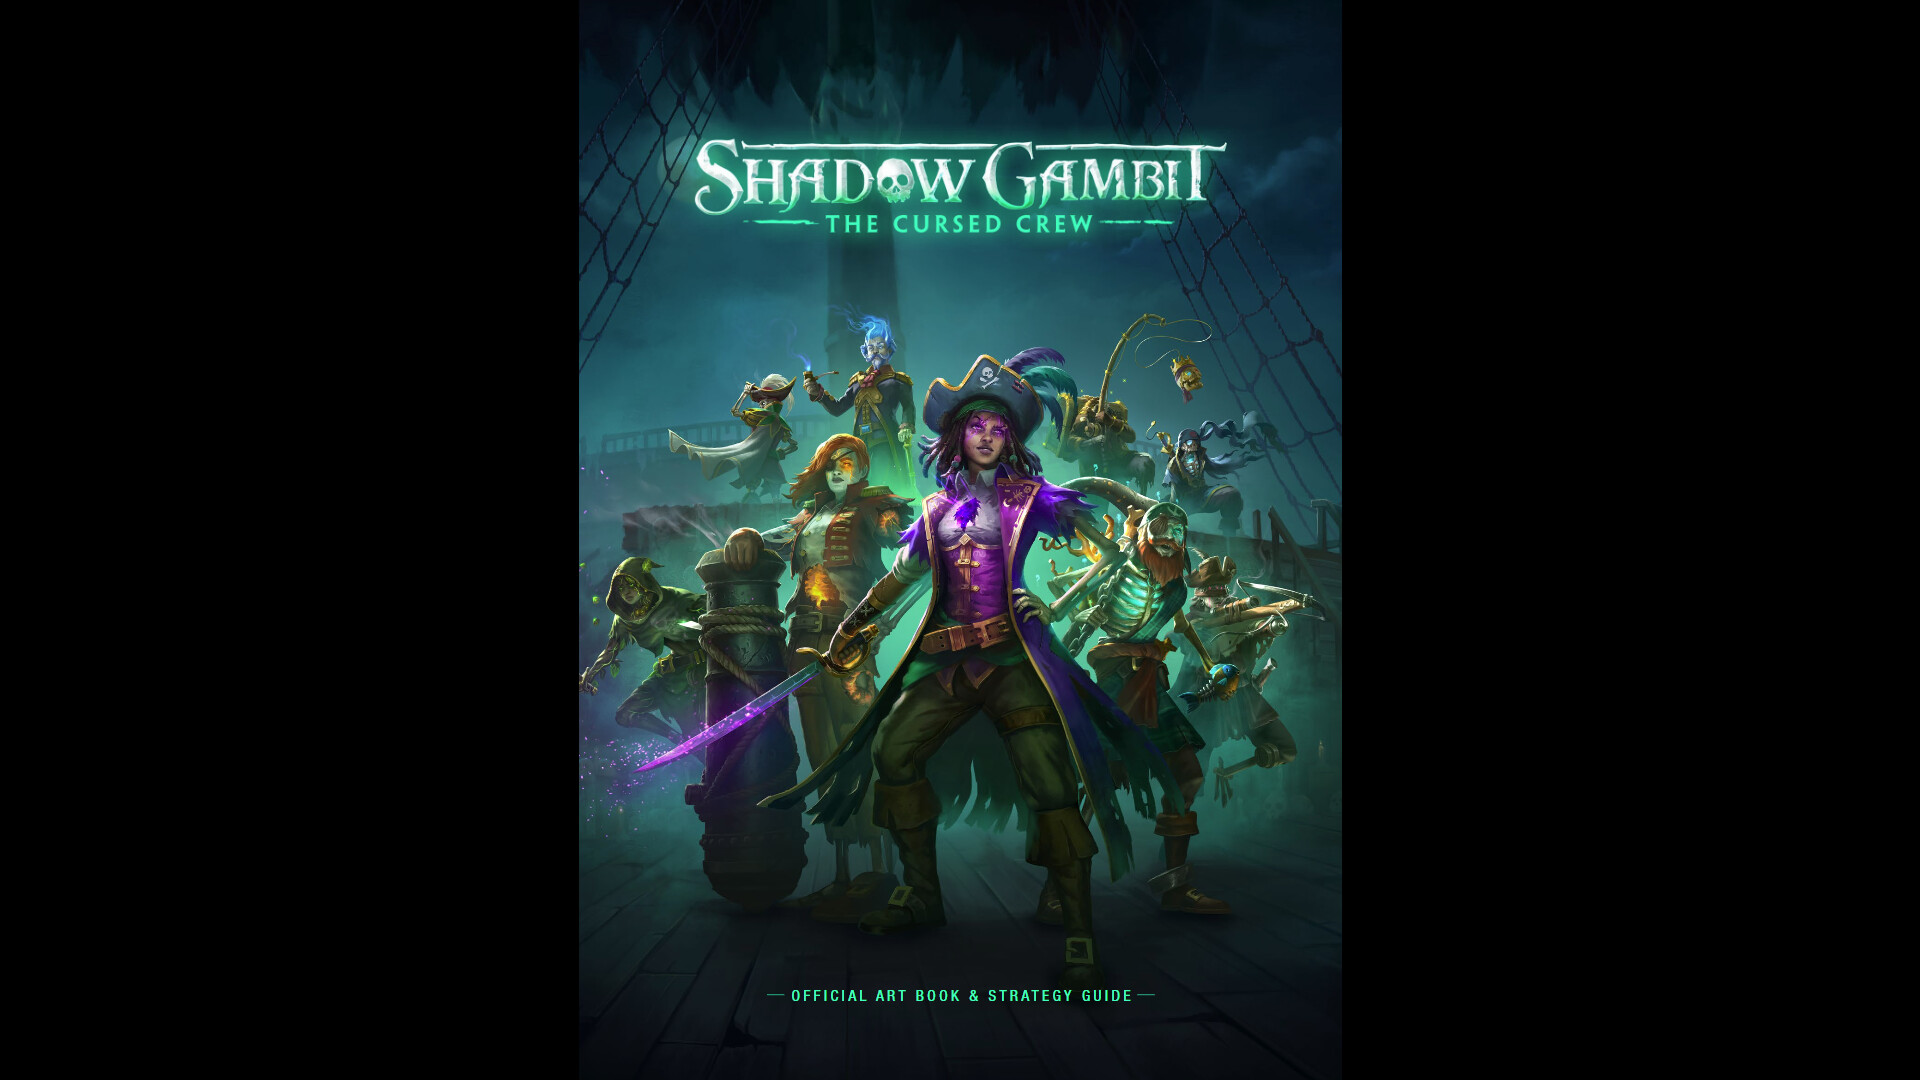 Shadow Gambit: The Cursed Crew - Artbook & Strategy Guide DLC Steam CD Key